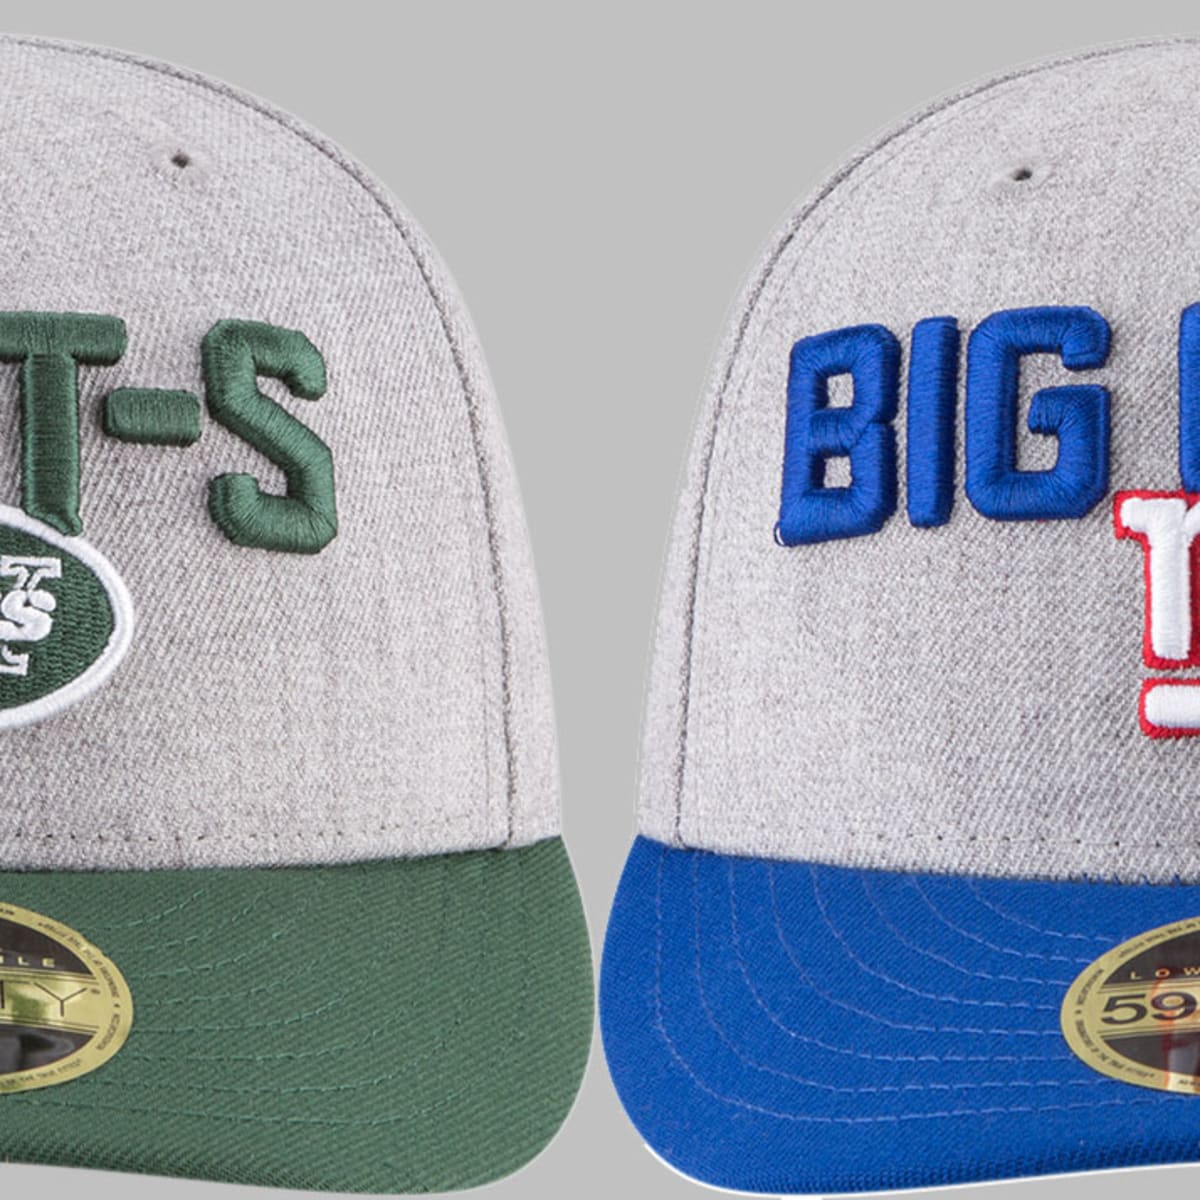 Photos: NFL draft pick hats for each team - Sports Illustrated